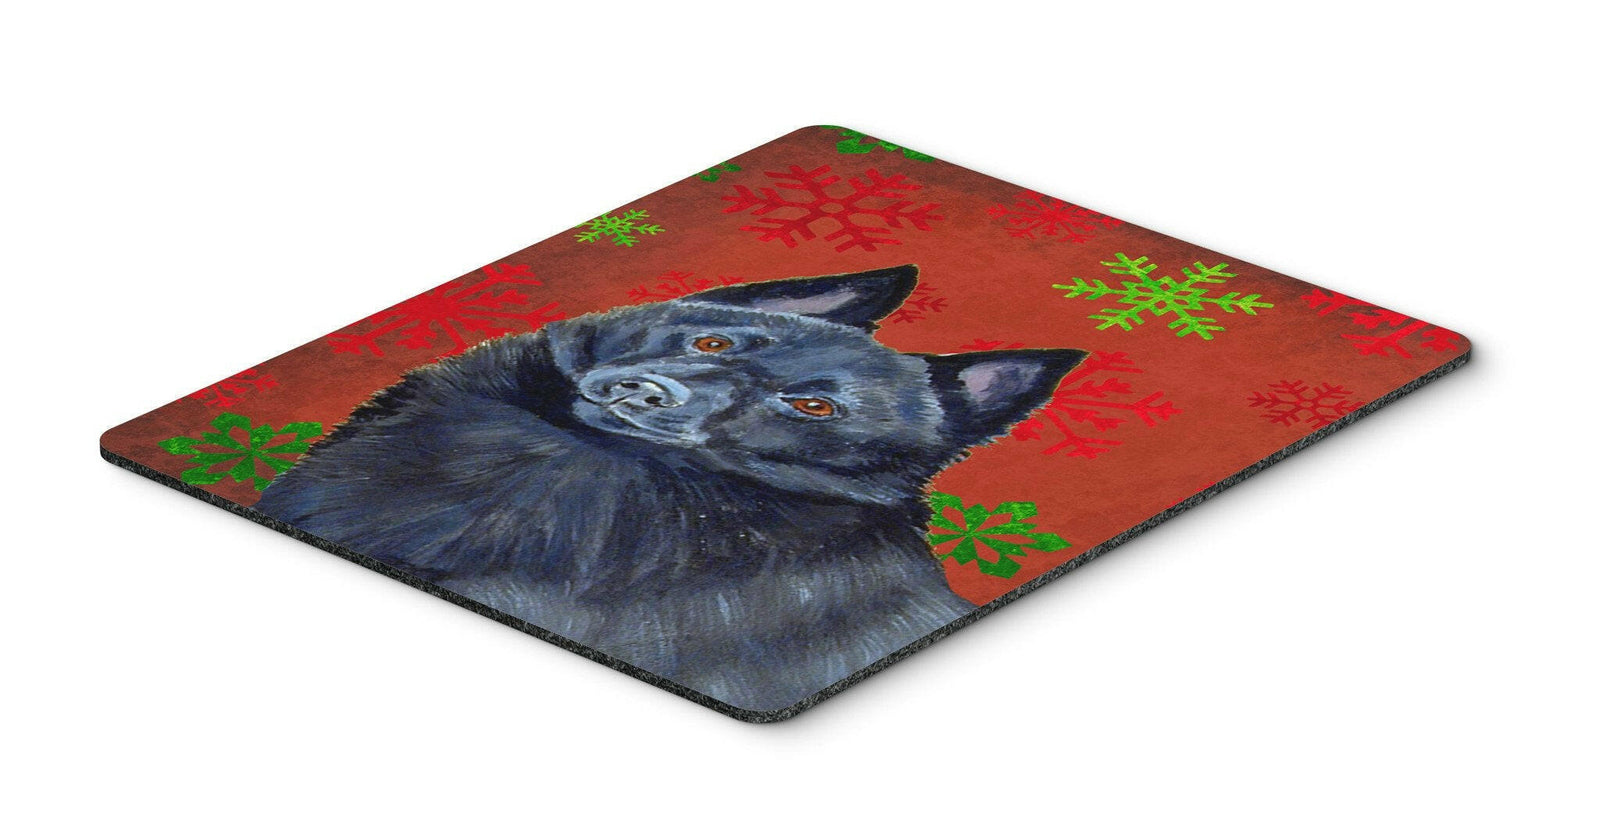 Schipperke Red and Green Snowflakes Christmas Mouse Pad, Hot Pad or Trivet by Caroline's Treasures